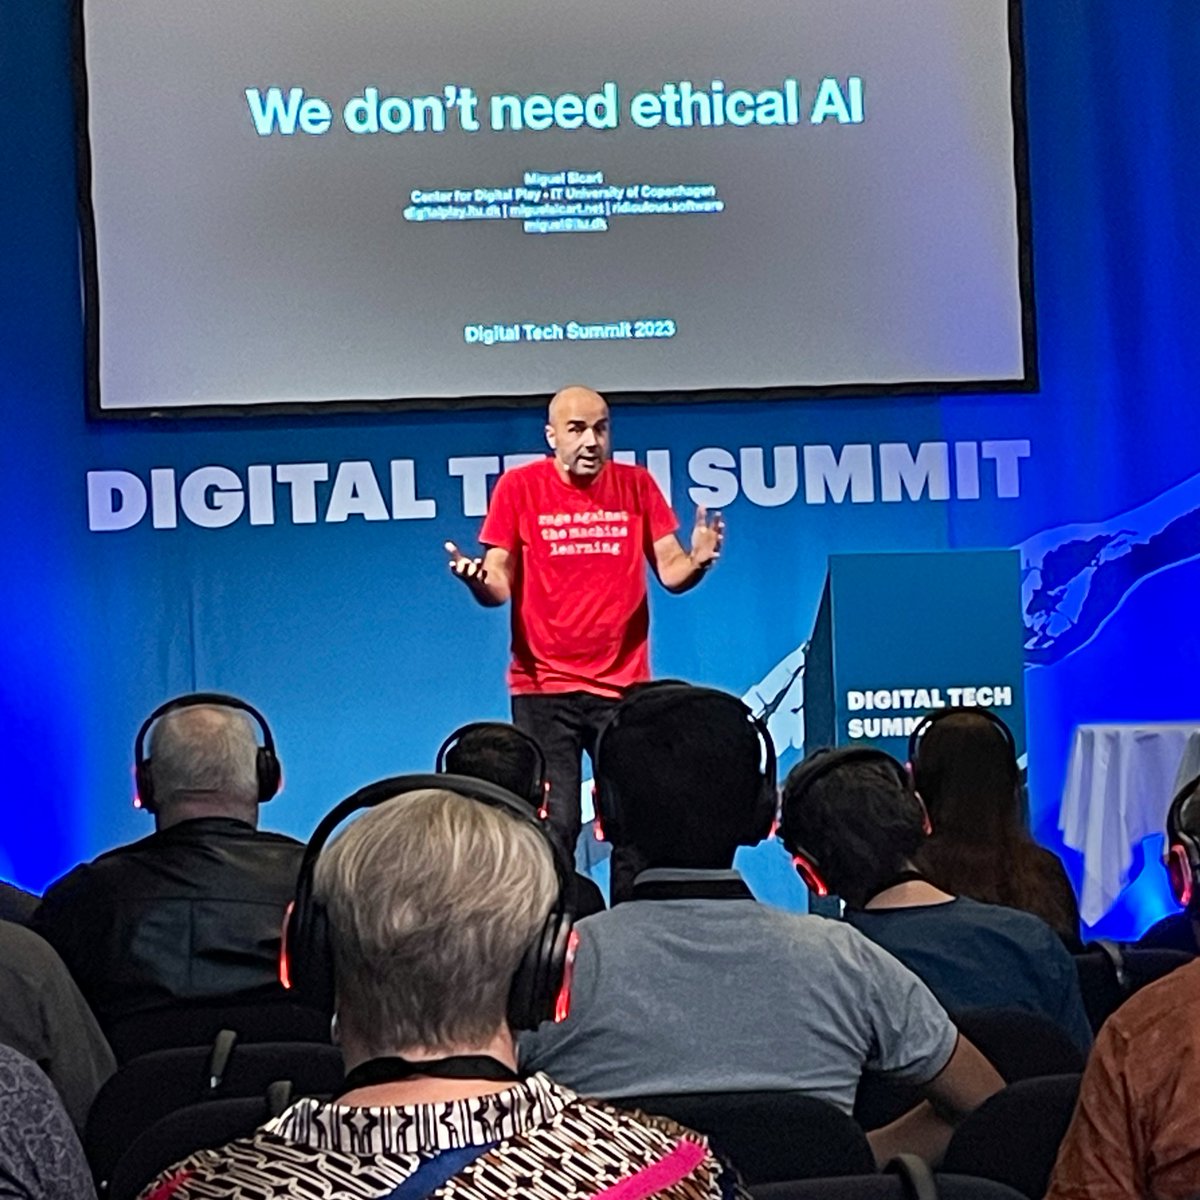 “The notion of “ethical AI” is highly problematic and hides important perspectives and dilemmas,” ITU professor @miguelsicart argues at #DigitalTechSummit.